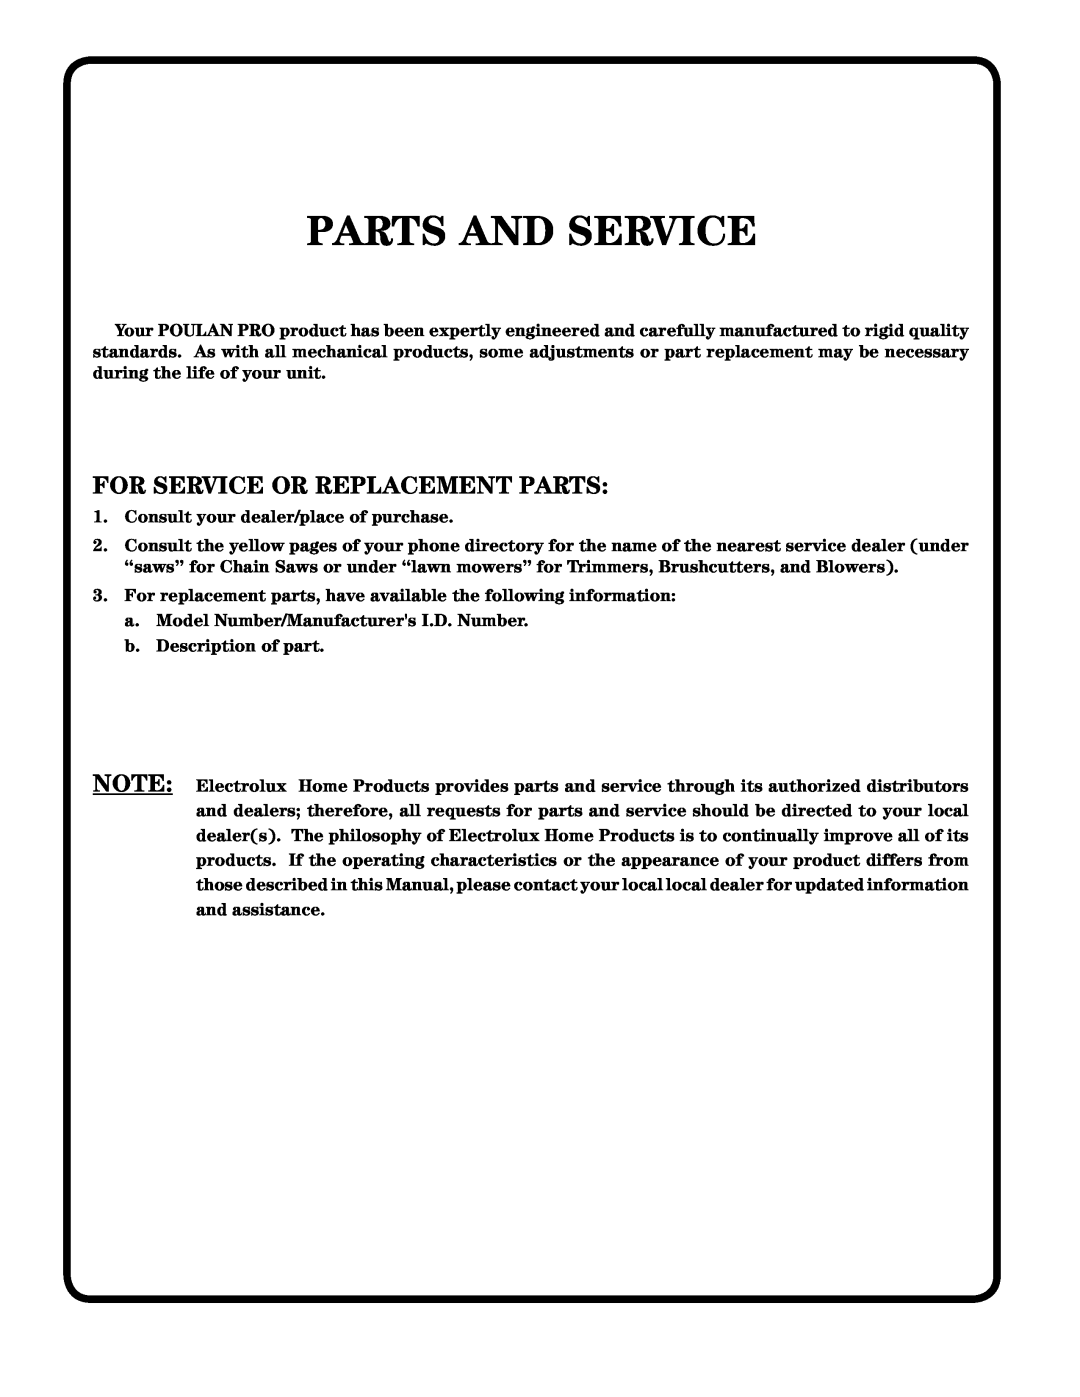 Poulan 954569516, 185498 owner manual Parts And Service, For Service Or Replacement Parts 